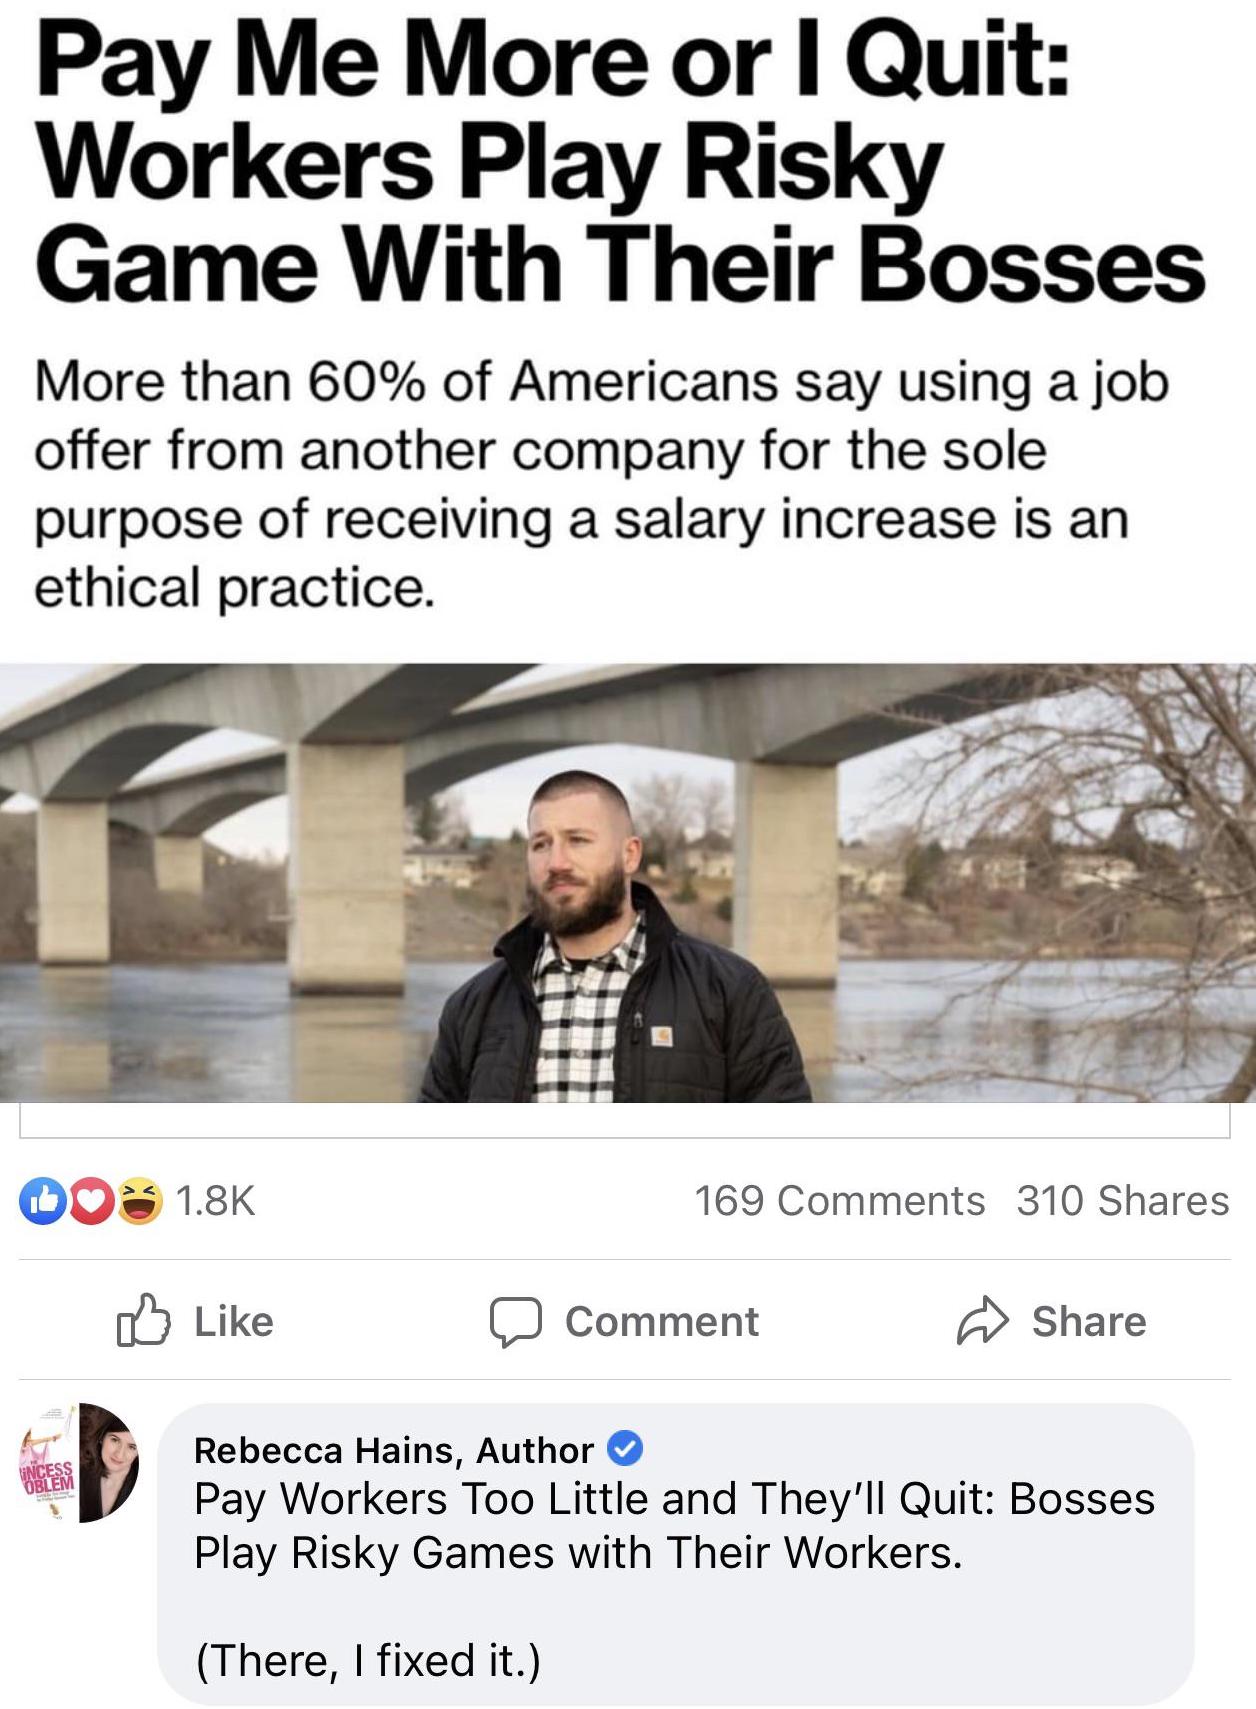 savage clapbacks - media - Pay Me More or I Quit Workers Play Risky Game With Their Bosses More than 60% of Americans say using a job offer from another company for the sole purpose of receiving a salary increase is an ethical practice. 169 310 Comment In